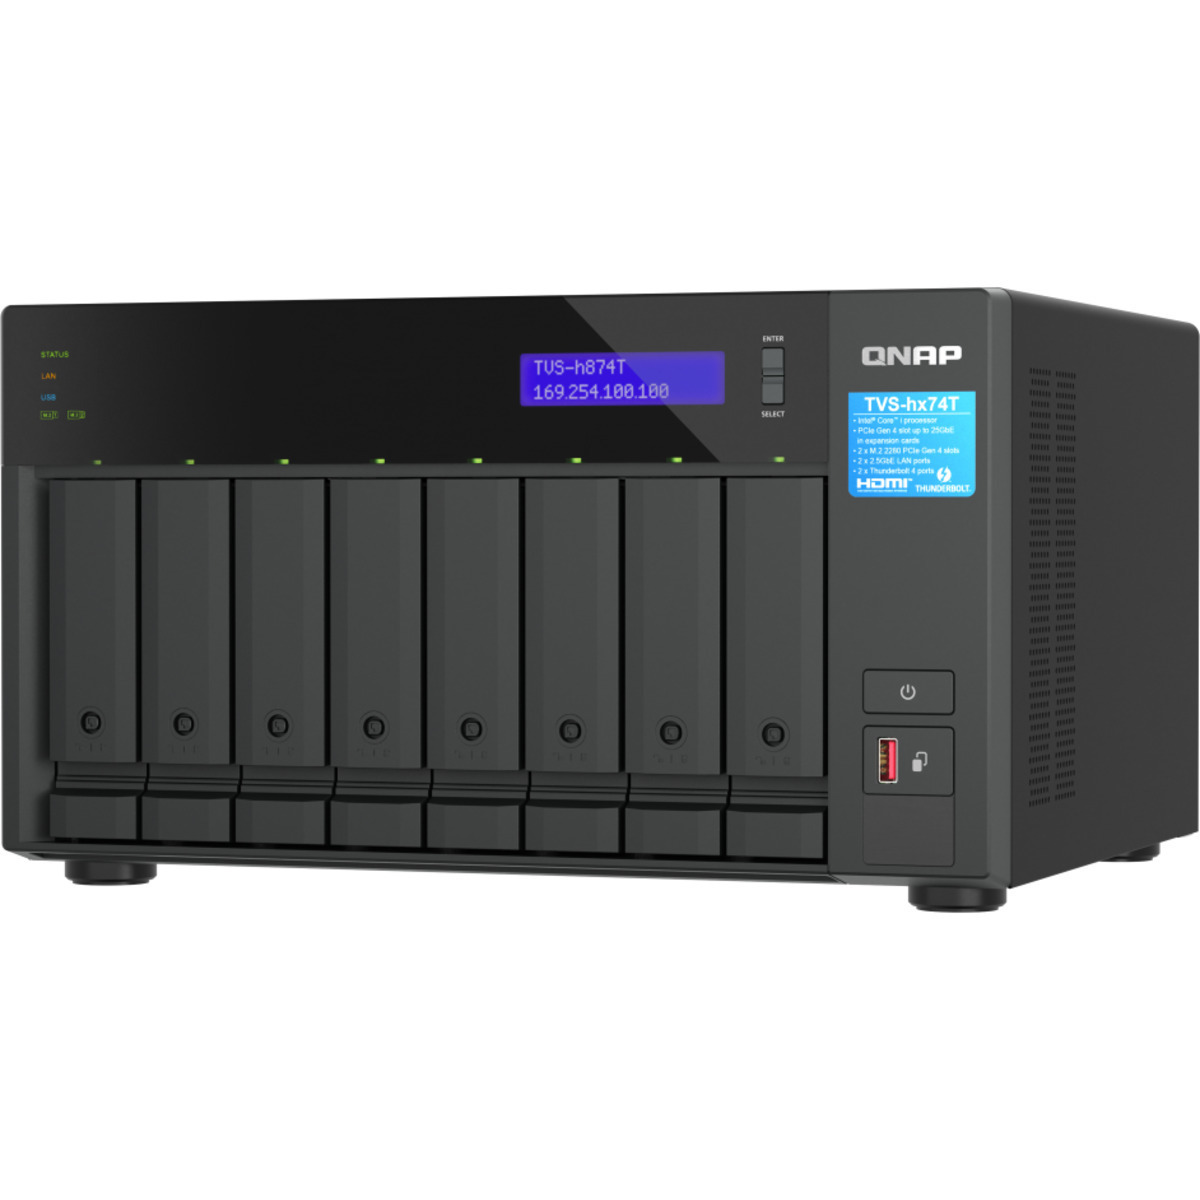 QNAP TVS-h874T Core i7 Thunderbolt 4 56tb 8-Bay Desktop Multimedia / Power User / Business DAS-NAS - Combo Direct + Network Storage Device 7x8tb Seagate IronWolf ST8000VN004 3.5 7200rpm SATA 6Gb/s HDD NAS Class Drives Installed - Burn-In Tested TVS-h874T Core i7 Thunderbolt 4